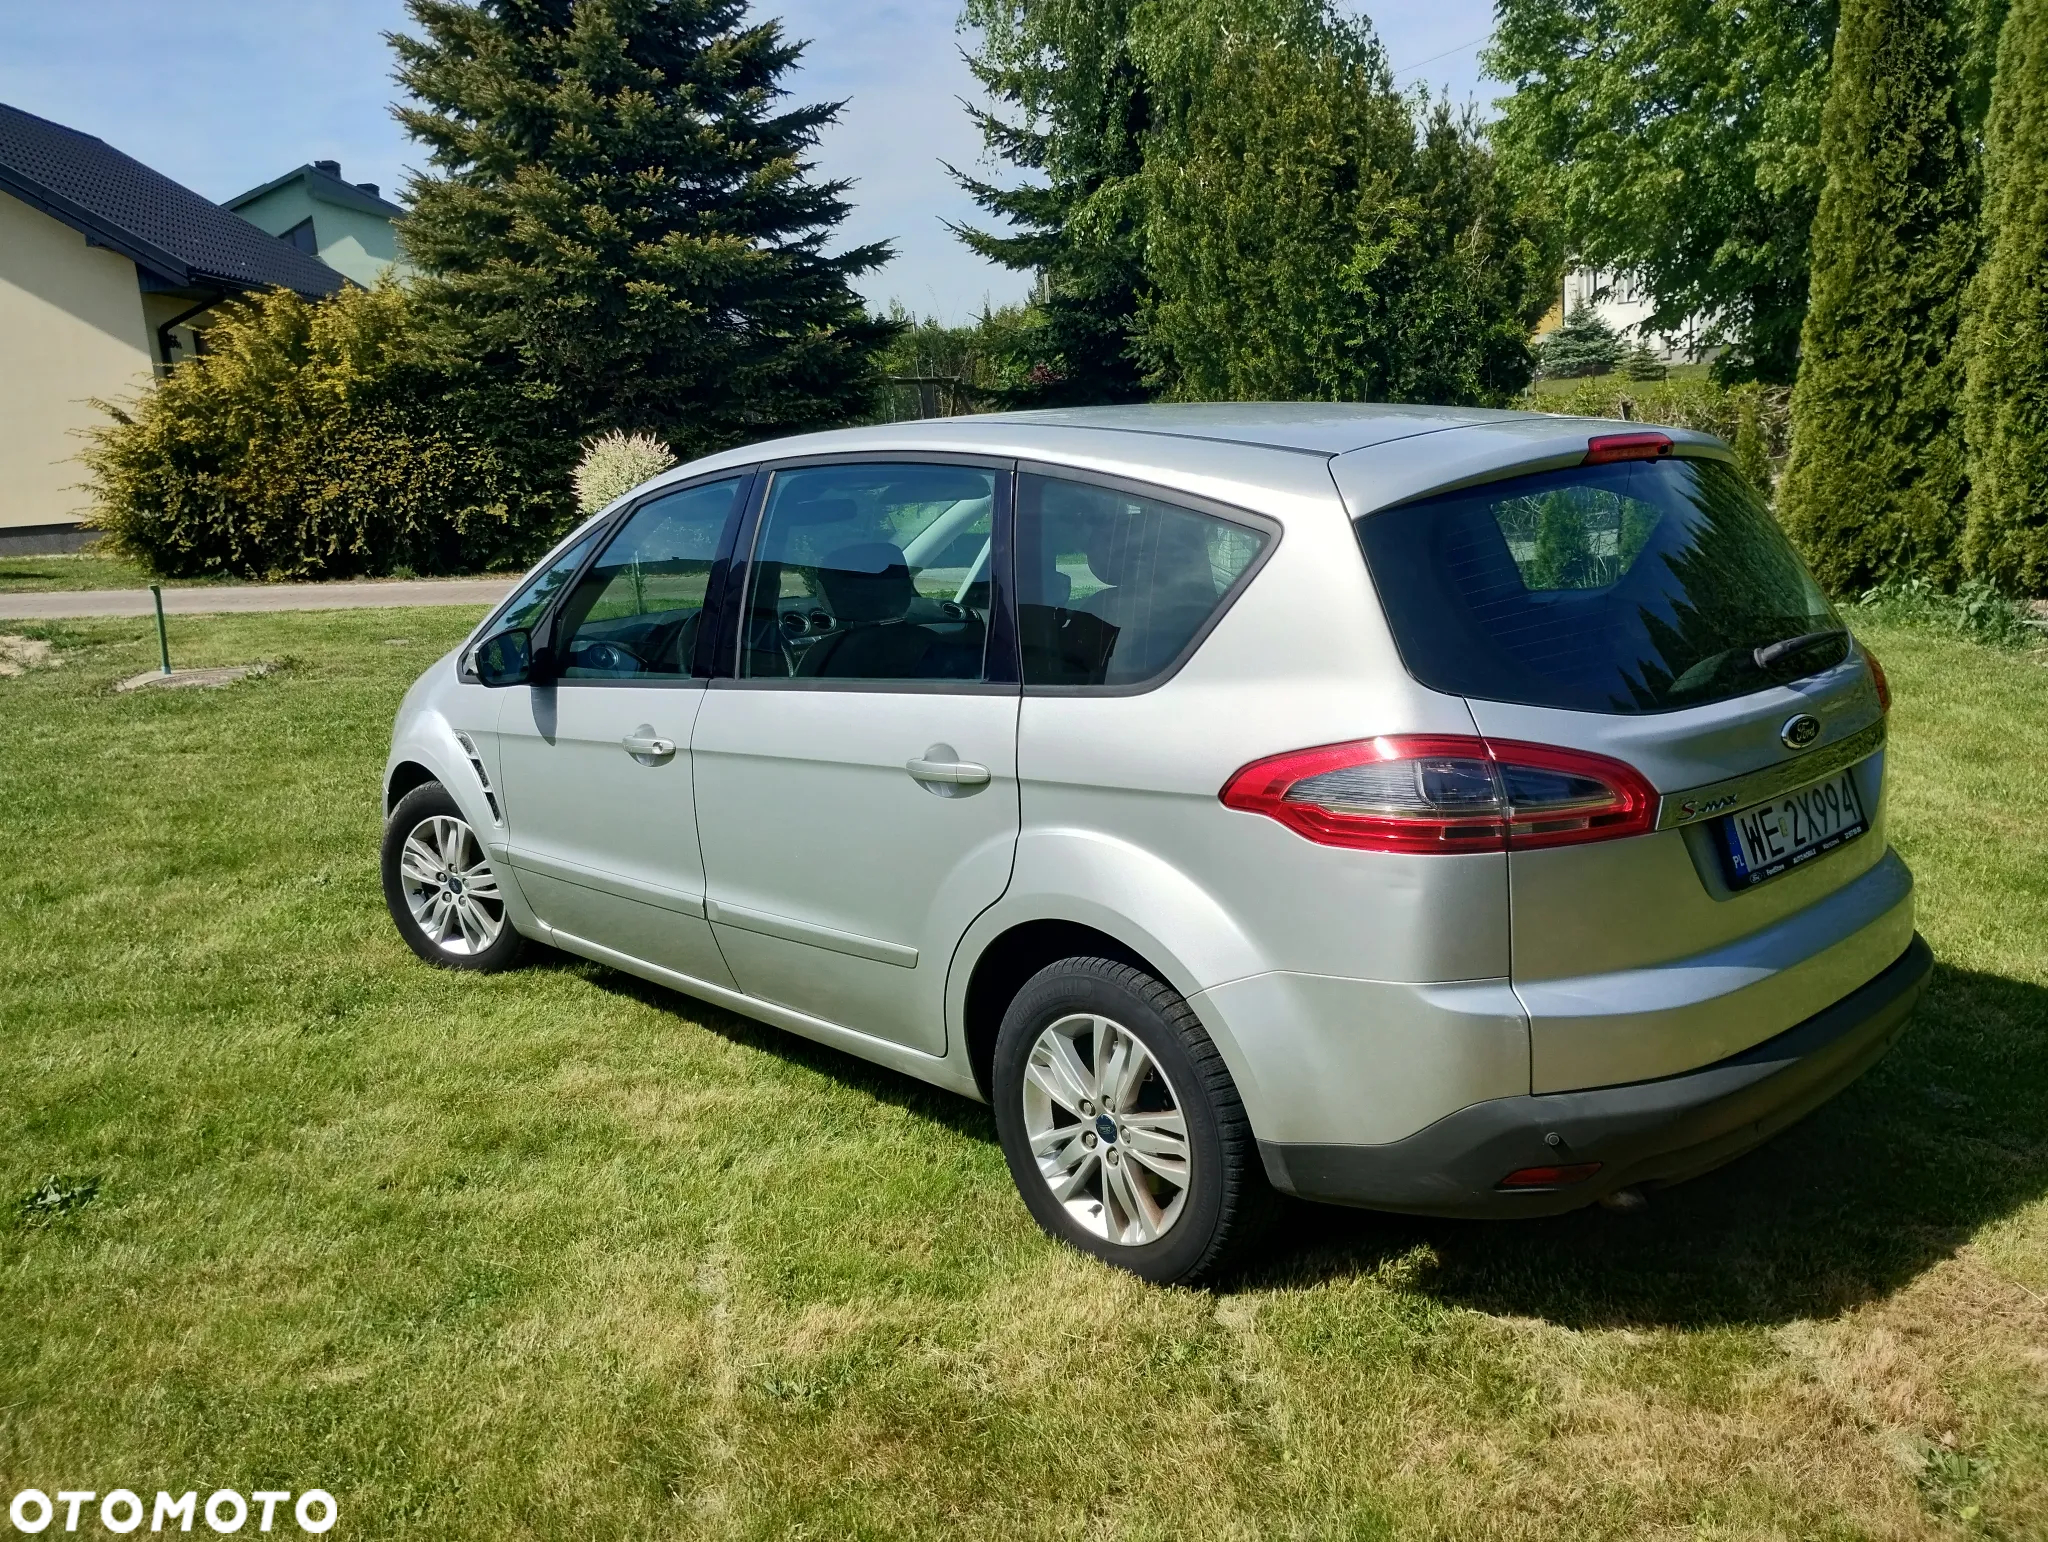 Ford S-Max 1.6 T Trend - 6